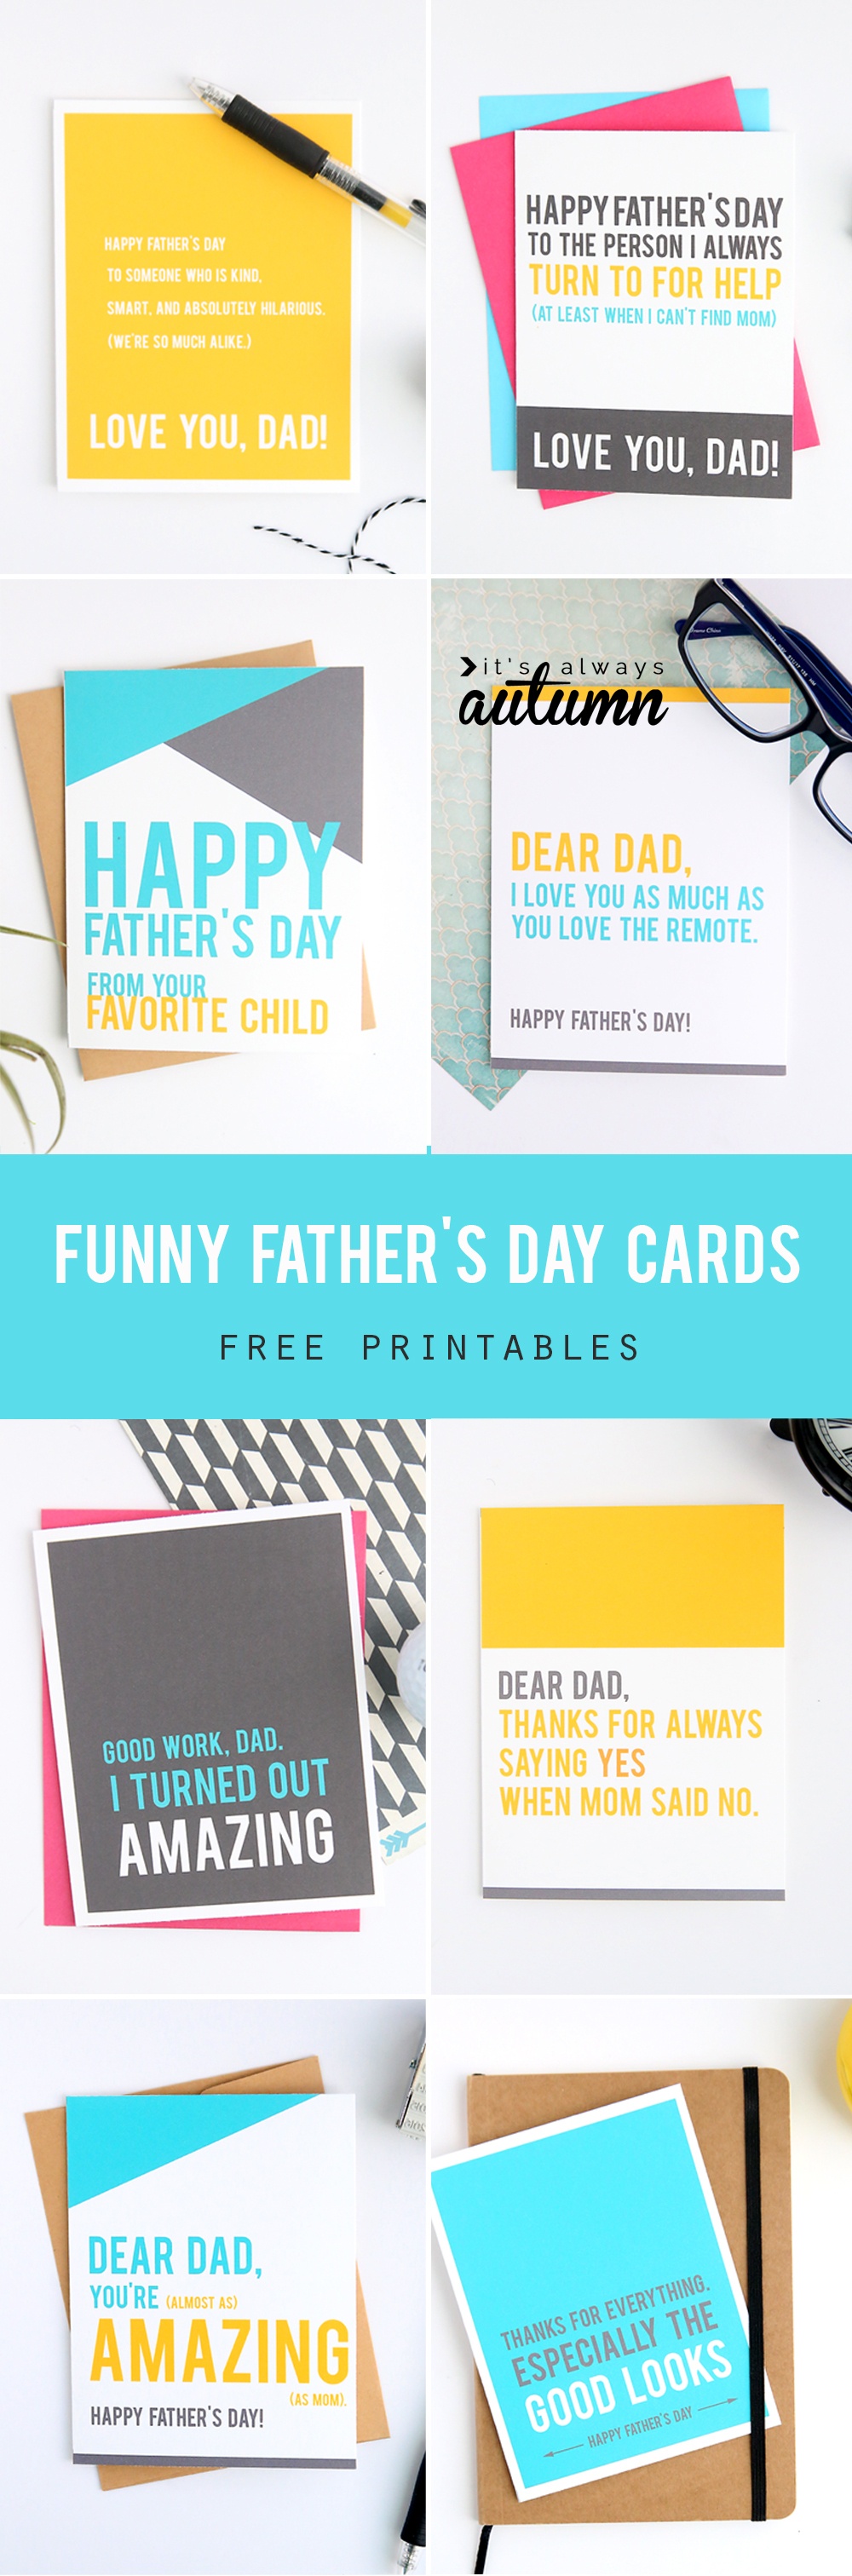 Funny Father's Day Cards You Can Print At Home - It's Always Autumn - Free Printable Funny Father's Day Cards